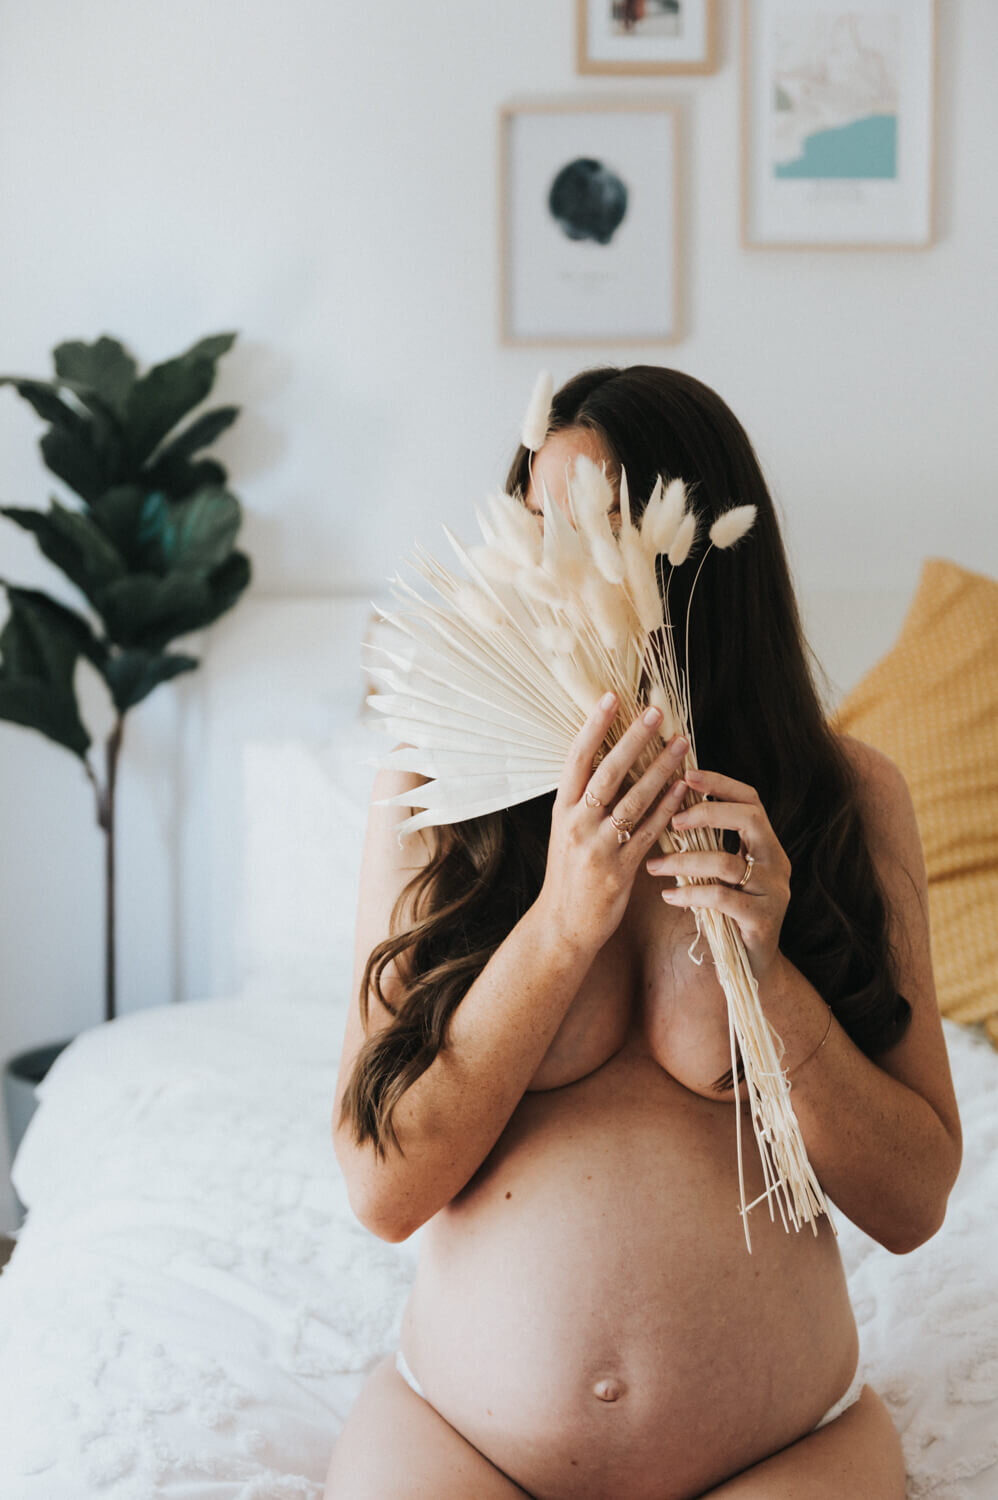 It's a great opportunity to create fun and beautiful maternity images